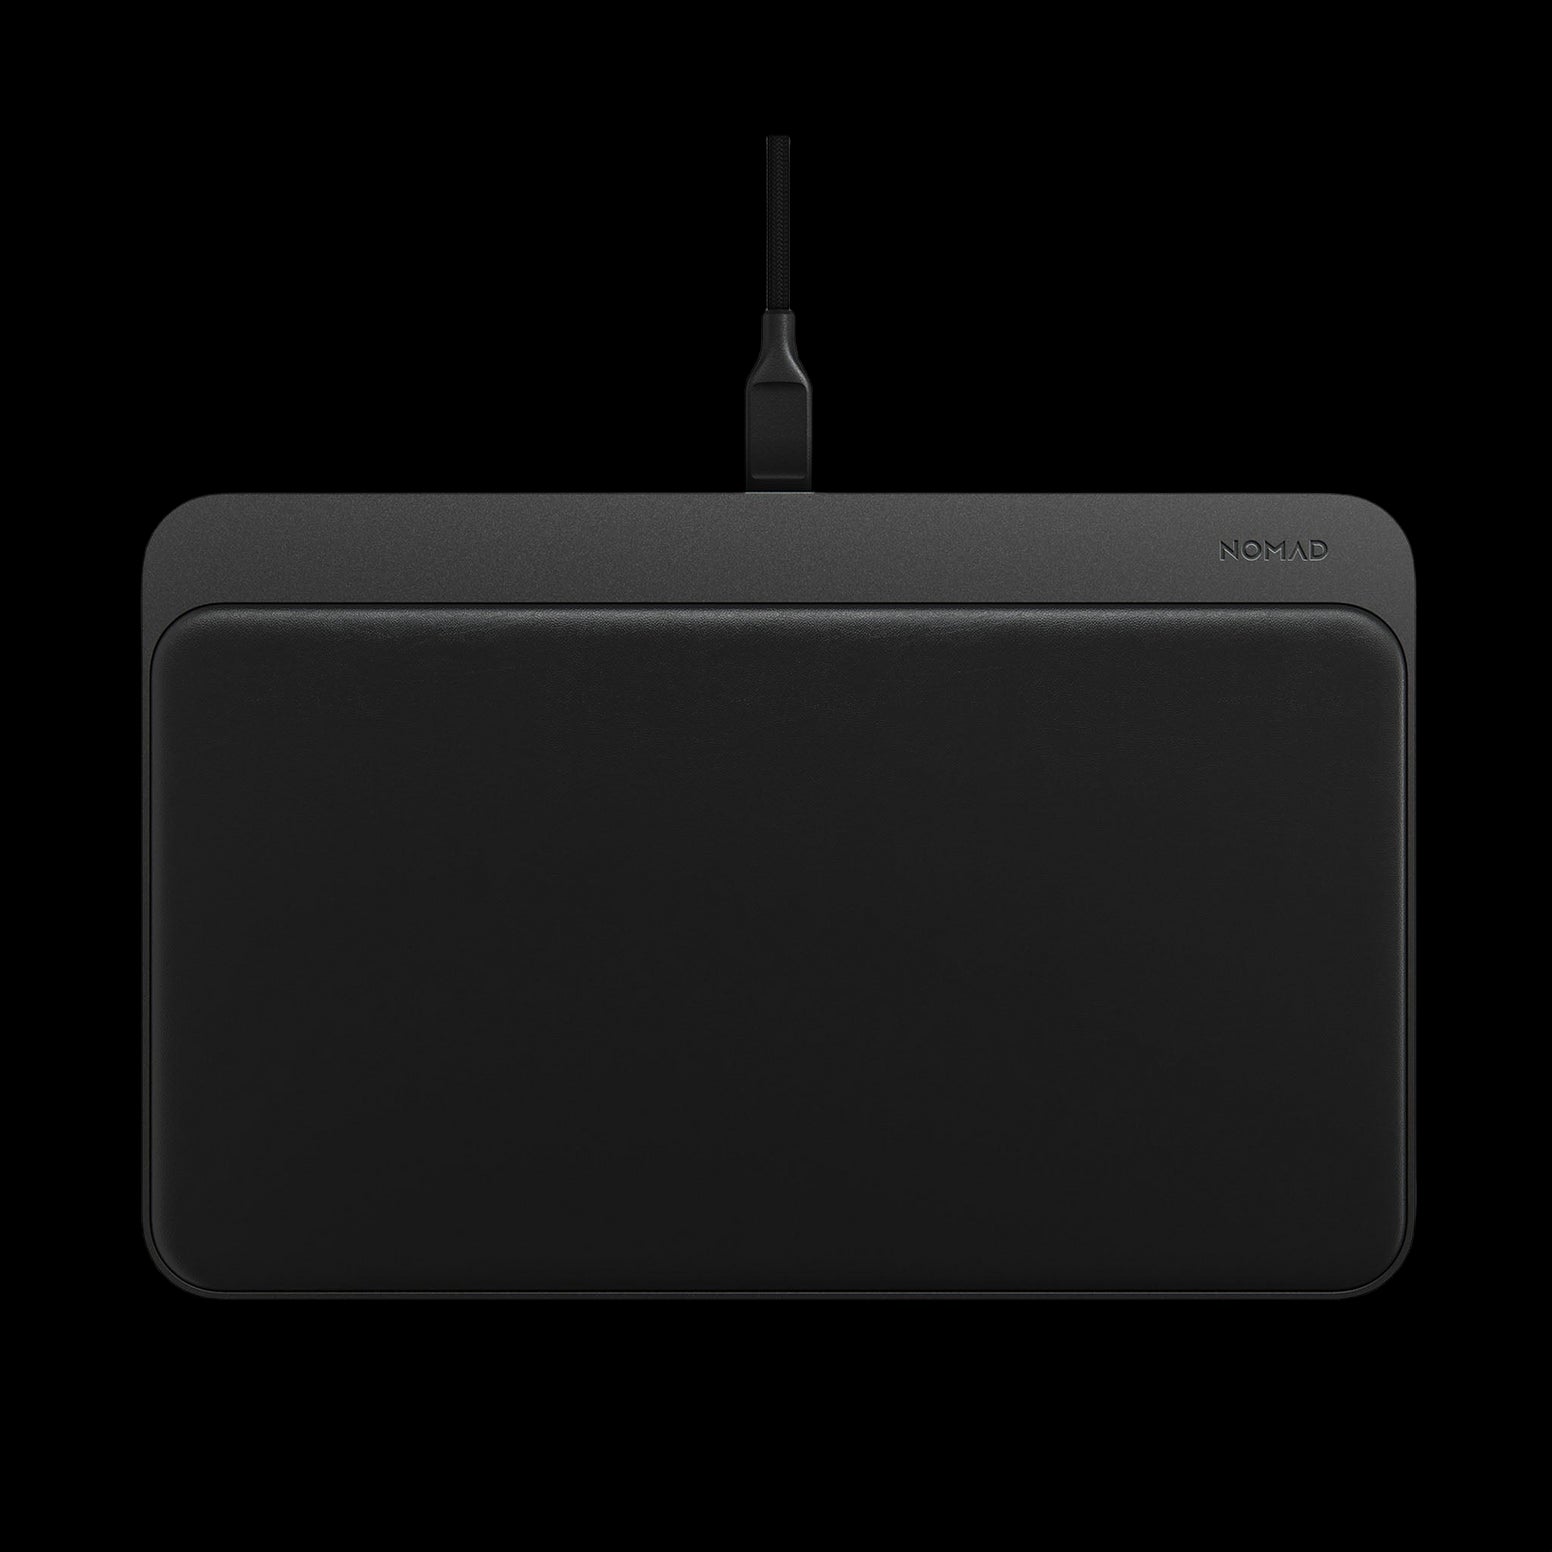 Nomad Base Station Pro Wireless Charger - Discontinued